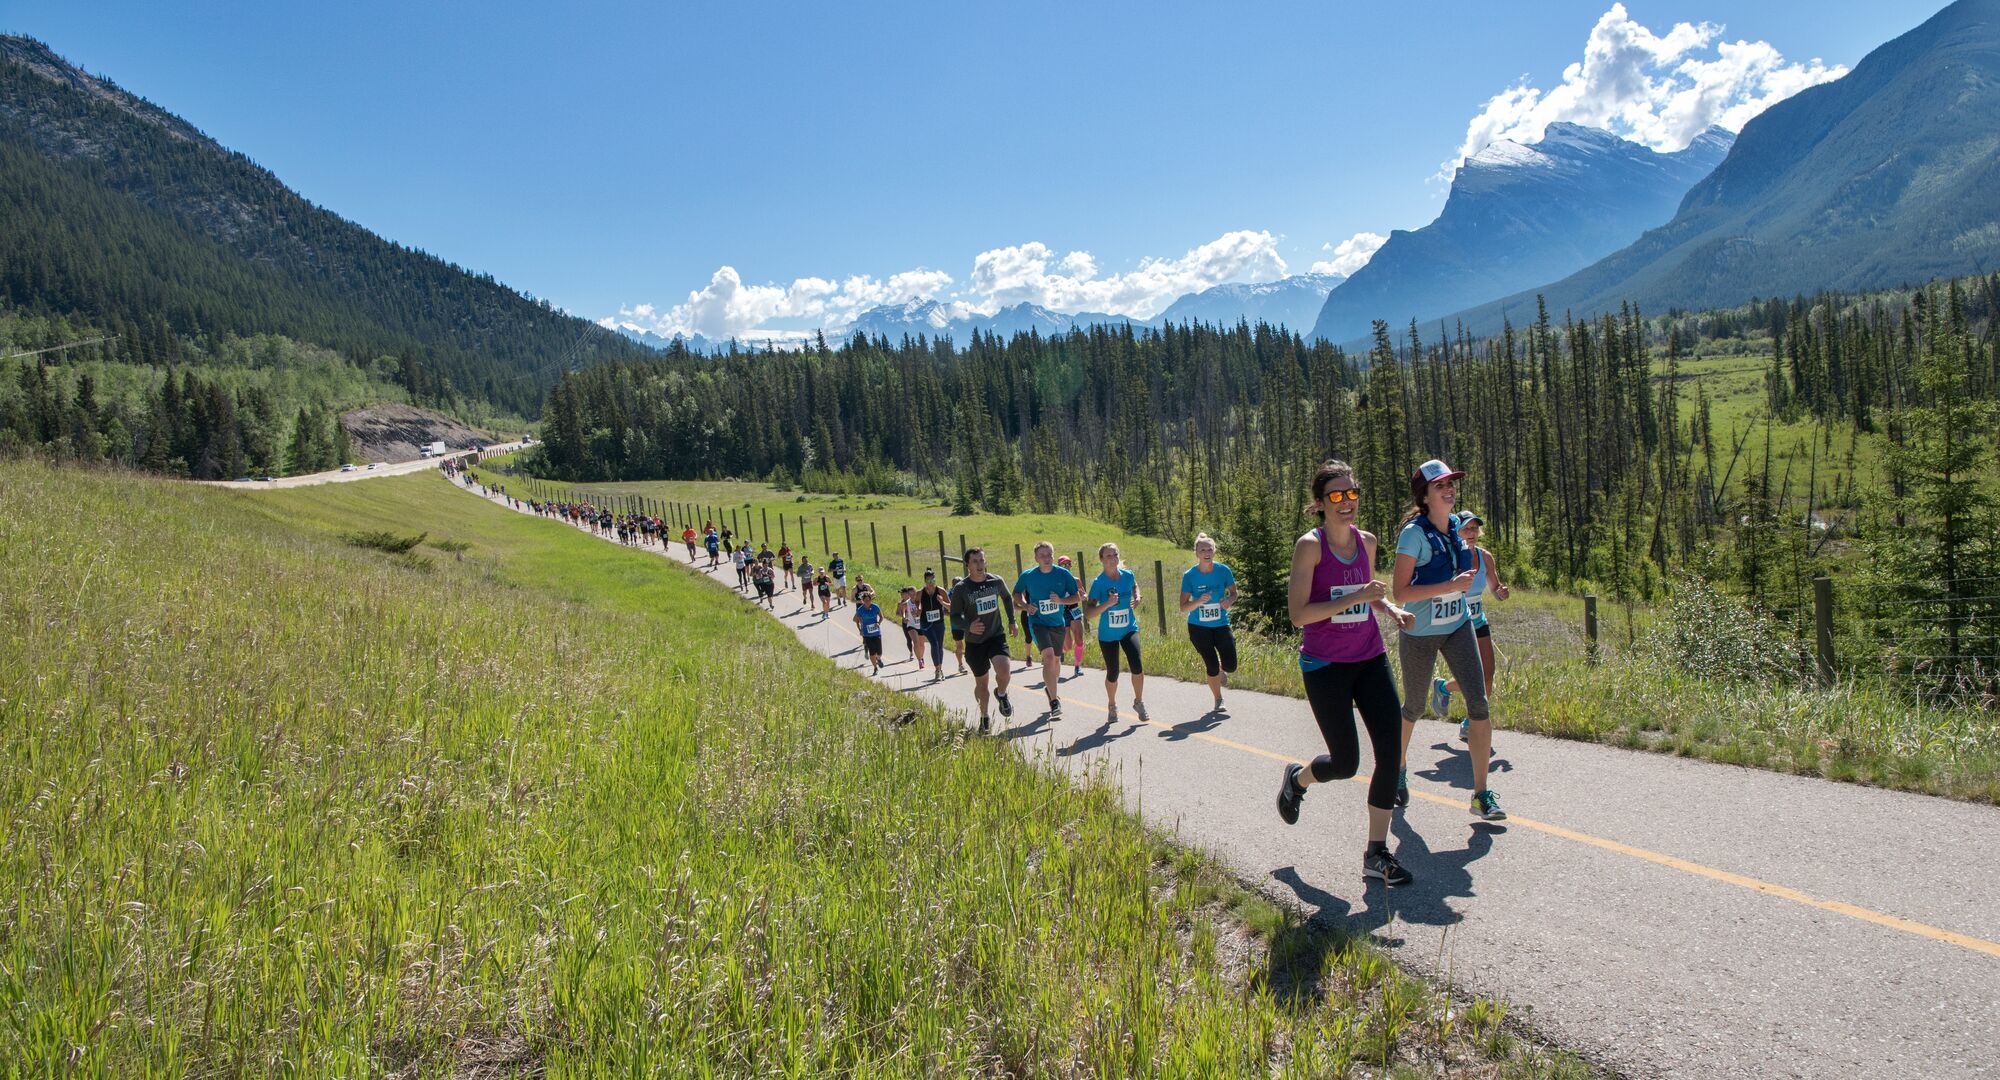 People participating in the Banff Marathon running on a trail with mountains in the background